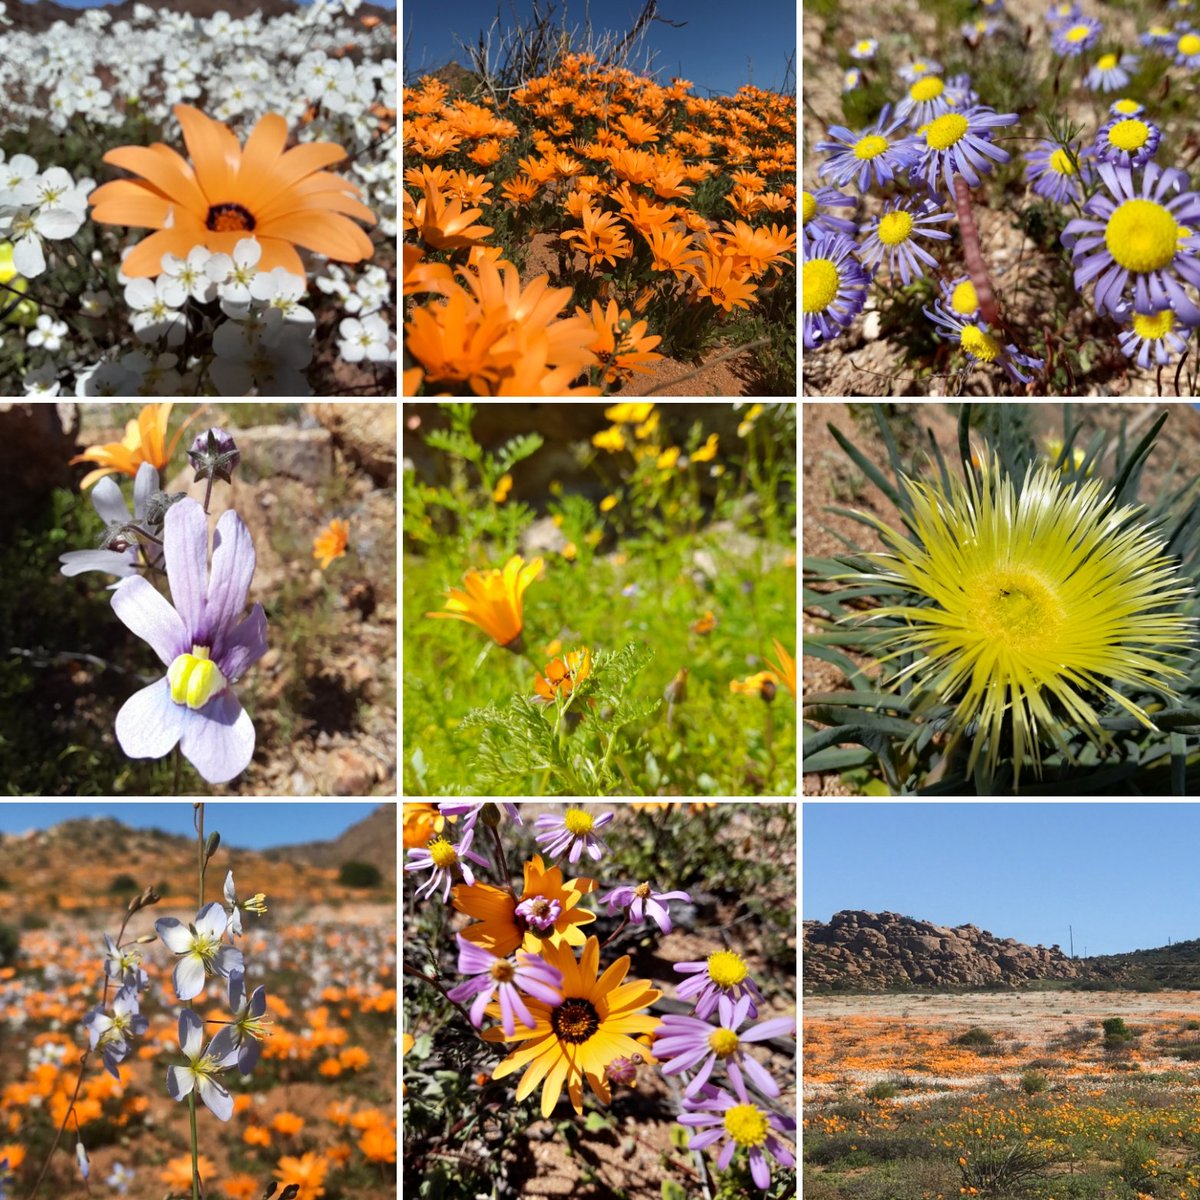 Happy 1st of September! If you are in #Namaqualand #NorthernCape enjoy the flowers. If not, make a plan to visit asap! 😉
#visitsouthafrica #experiencenortherncape